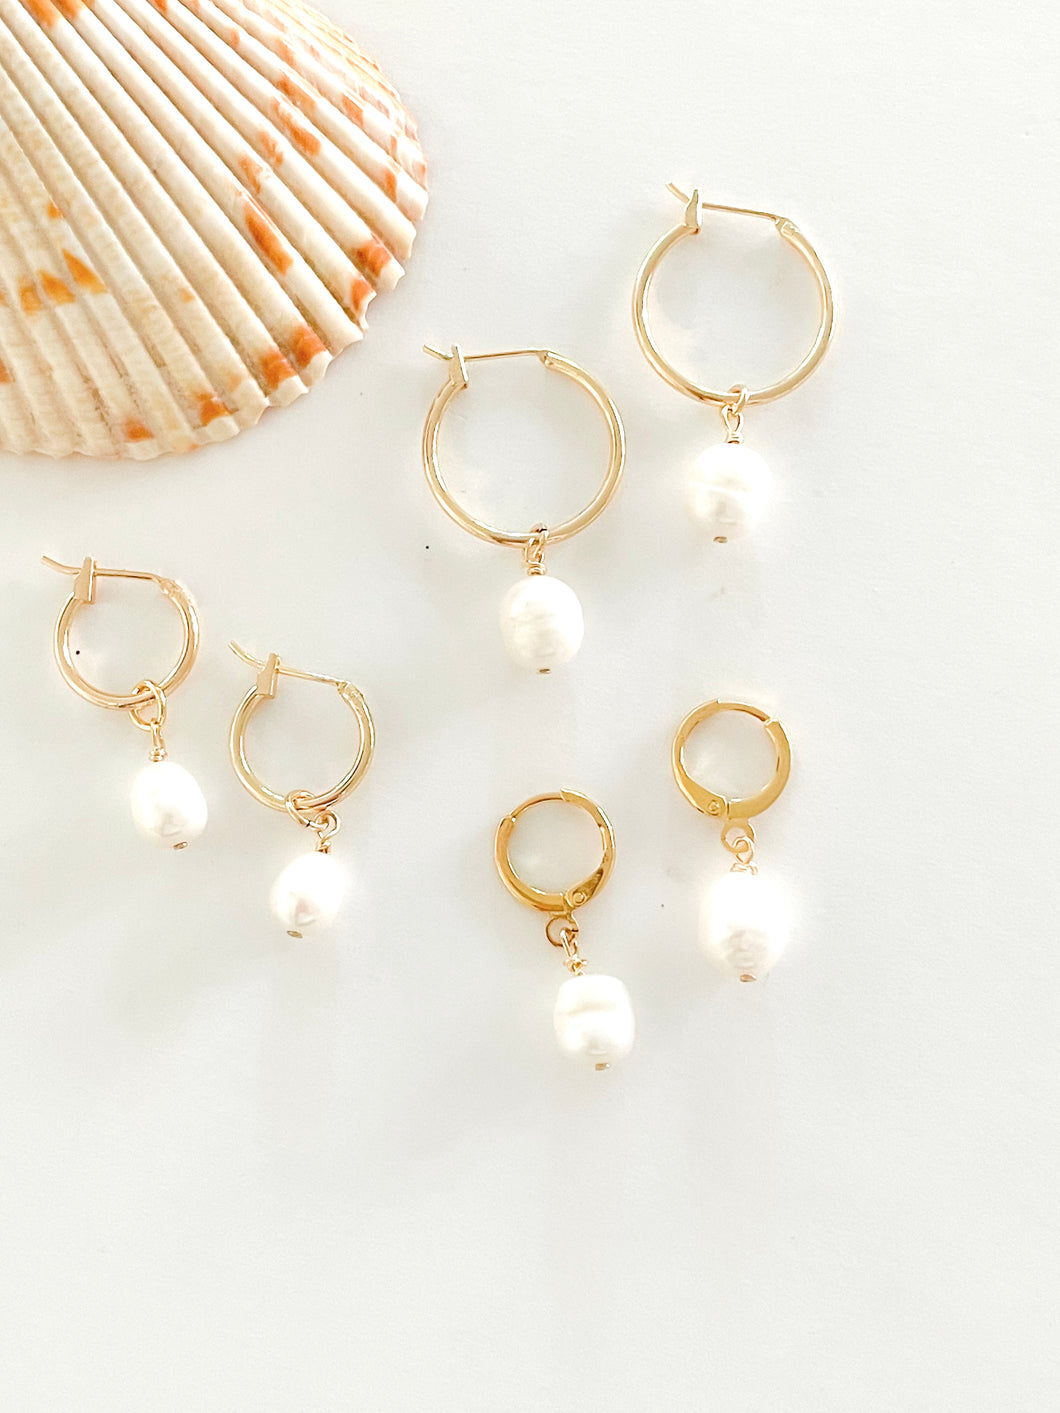 The Gold Filled Hoop and Pearl Earrings